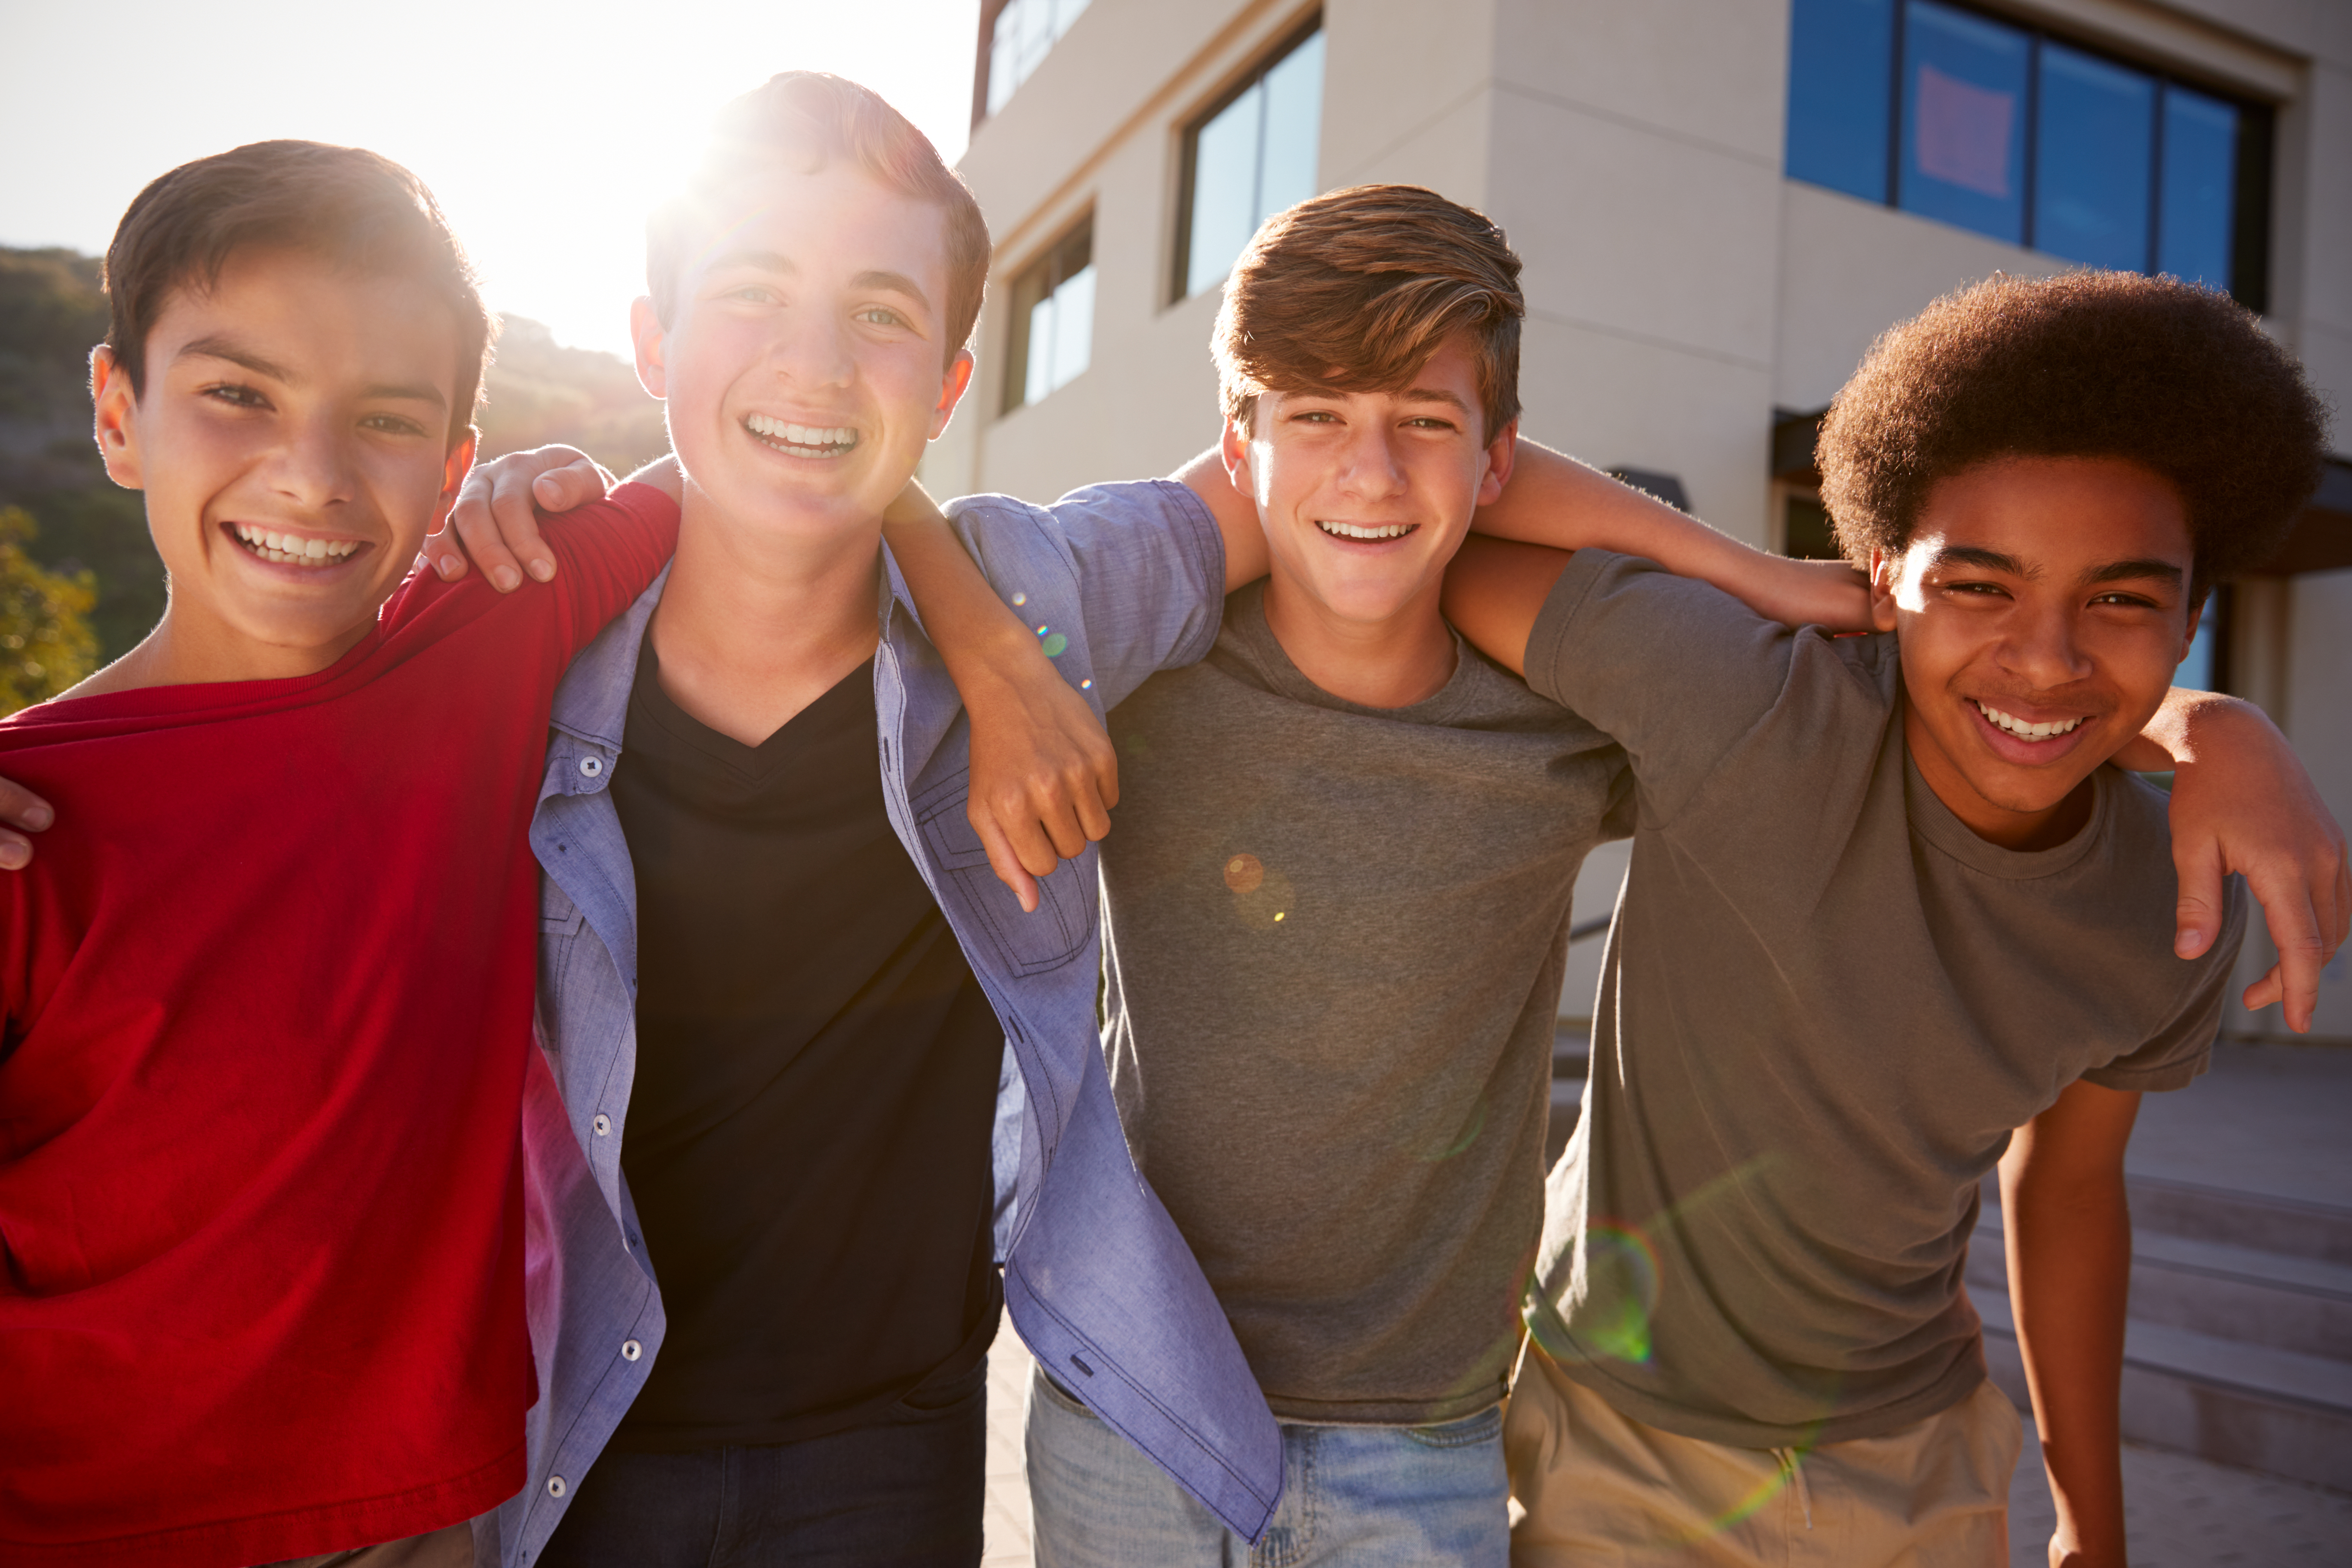 A group of high school boys laughing | Source: Shutterstock